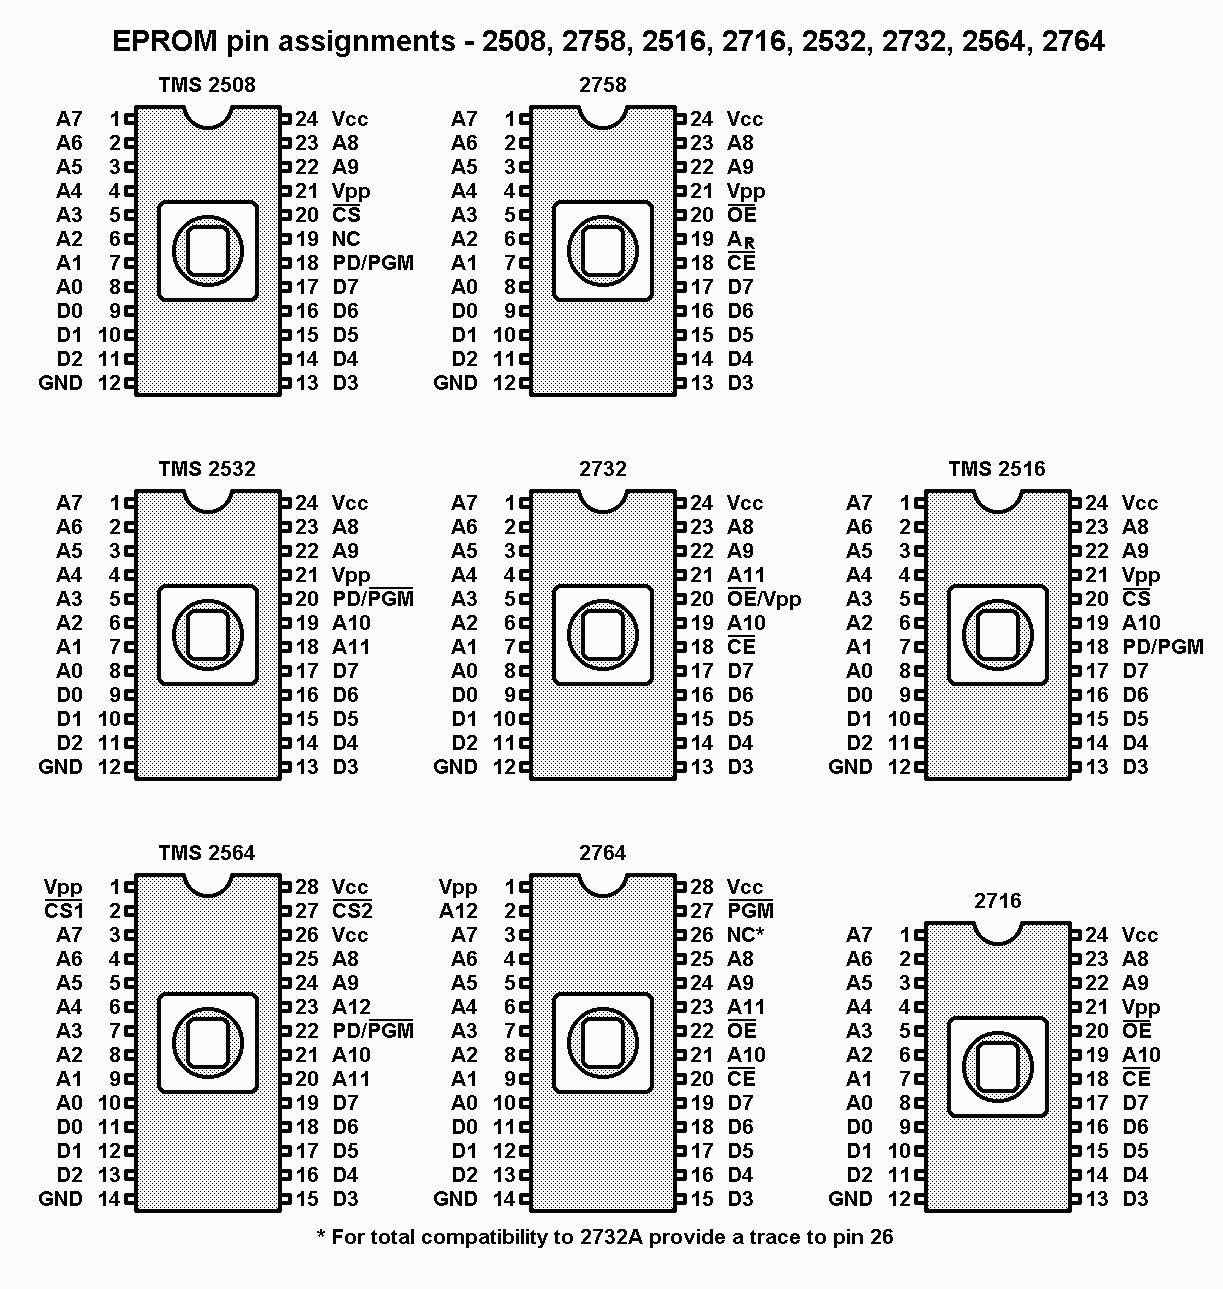 [EPROM pin assignments]